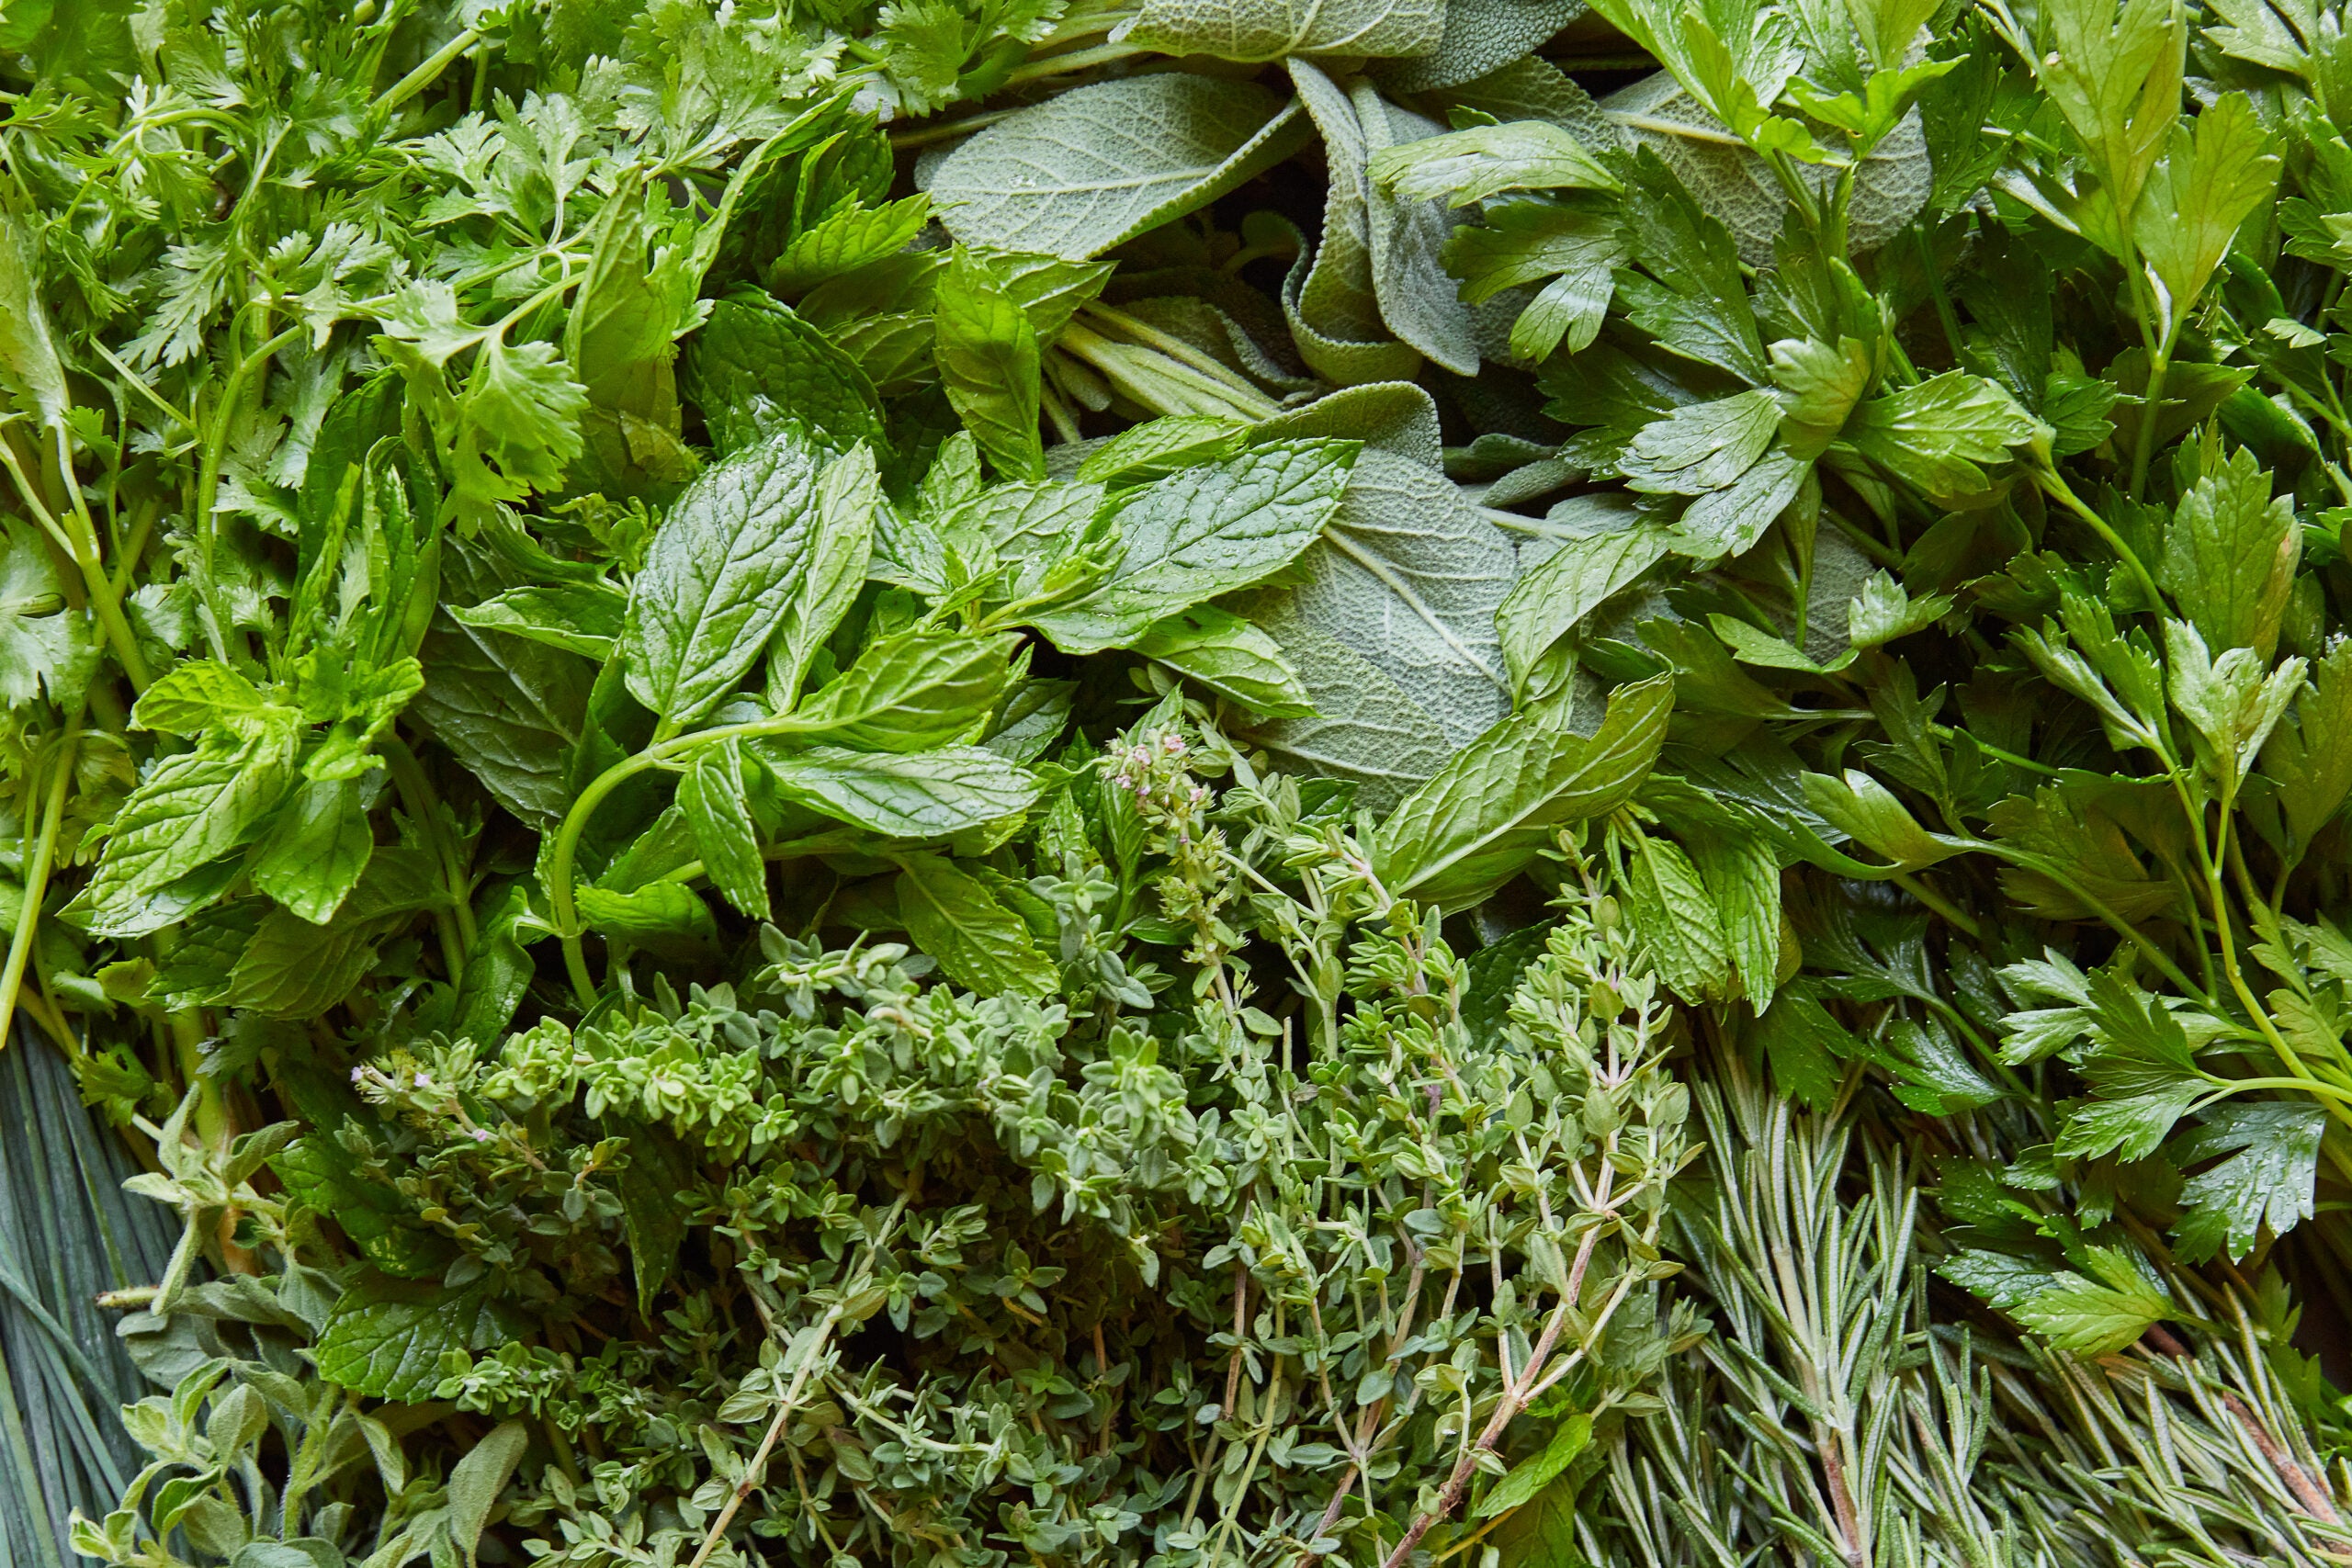 How to Use Up Fresh Herbs